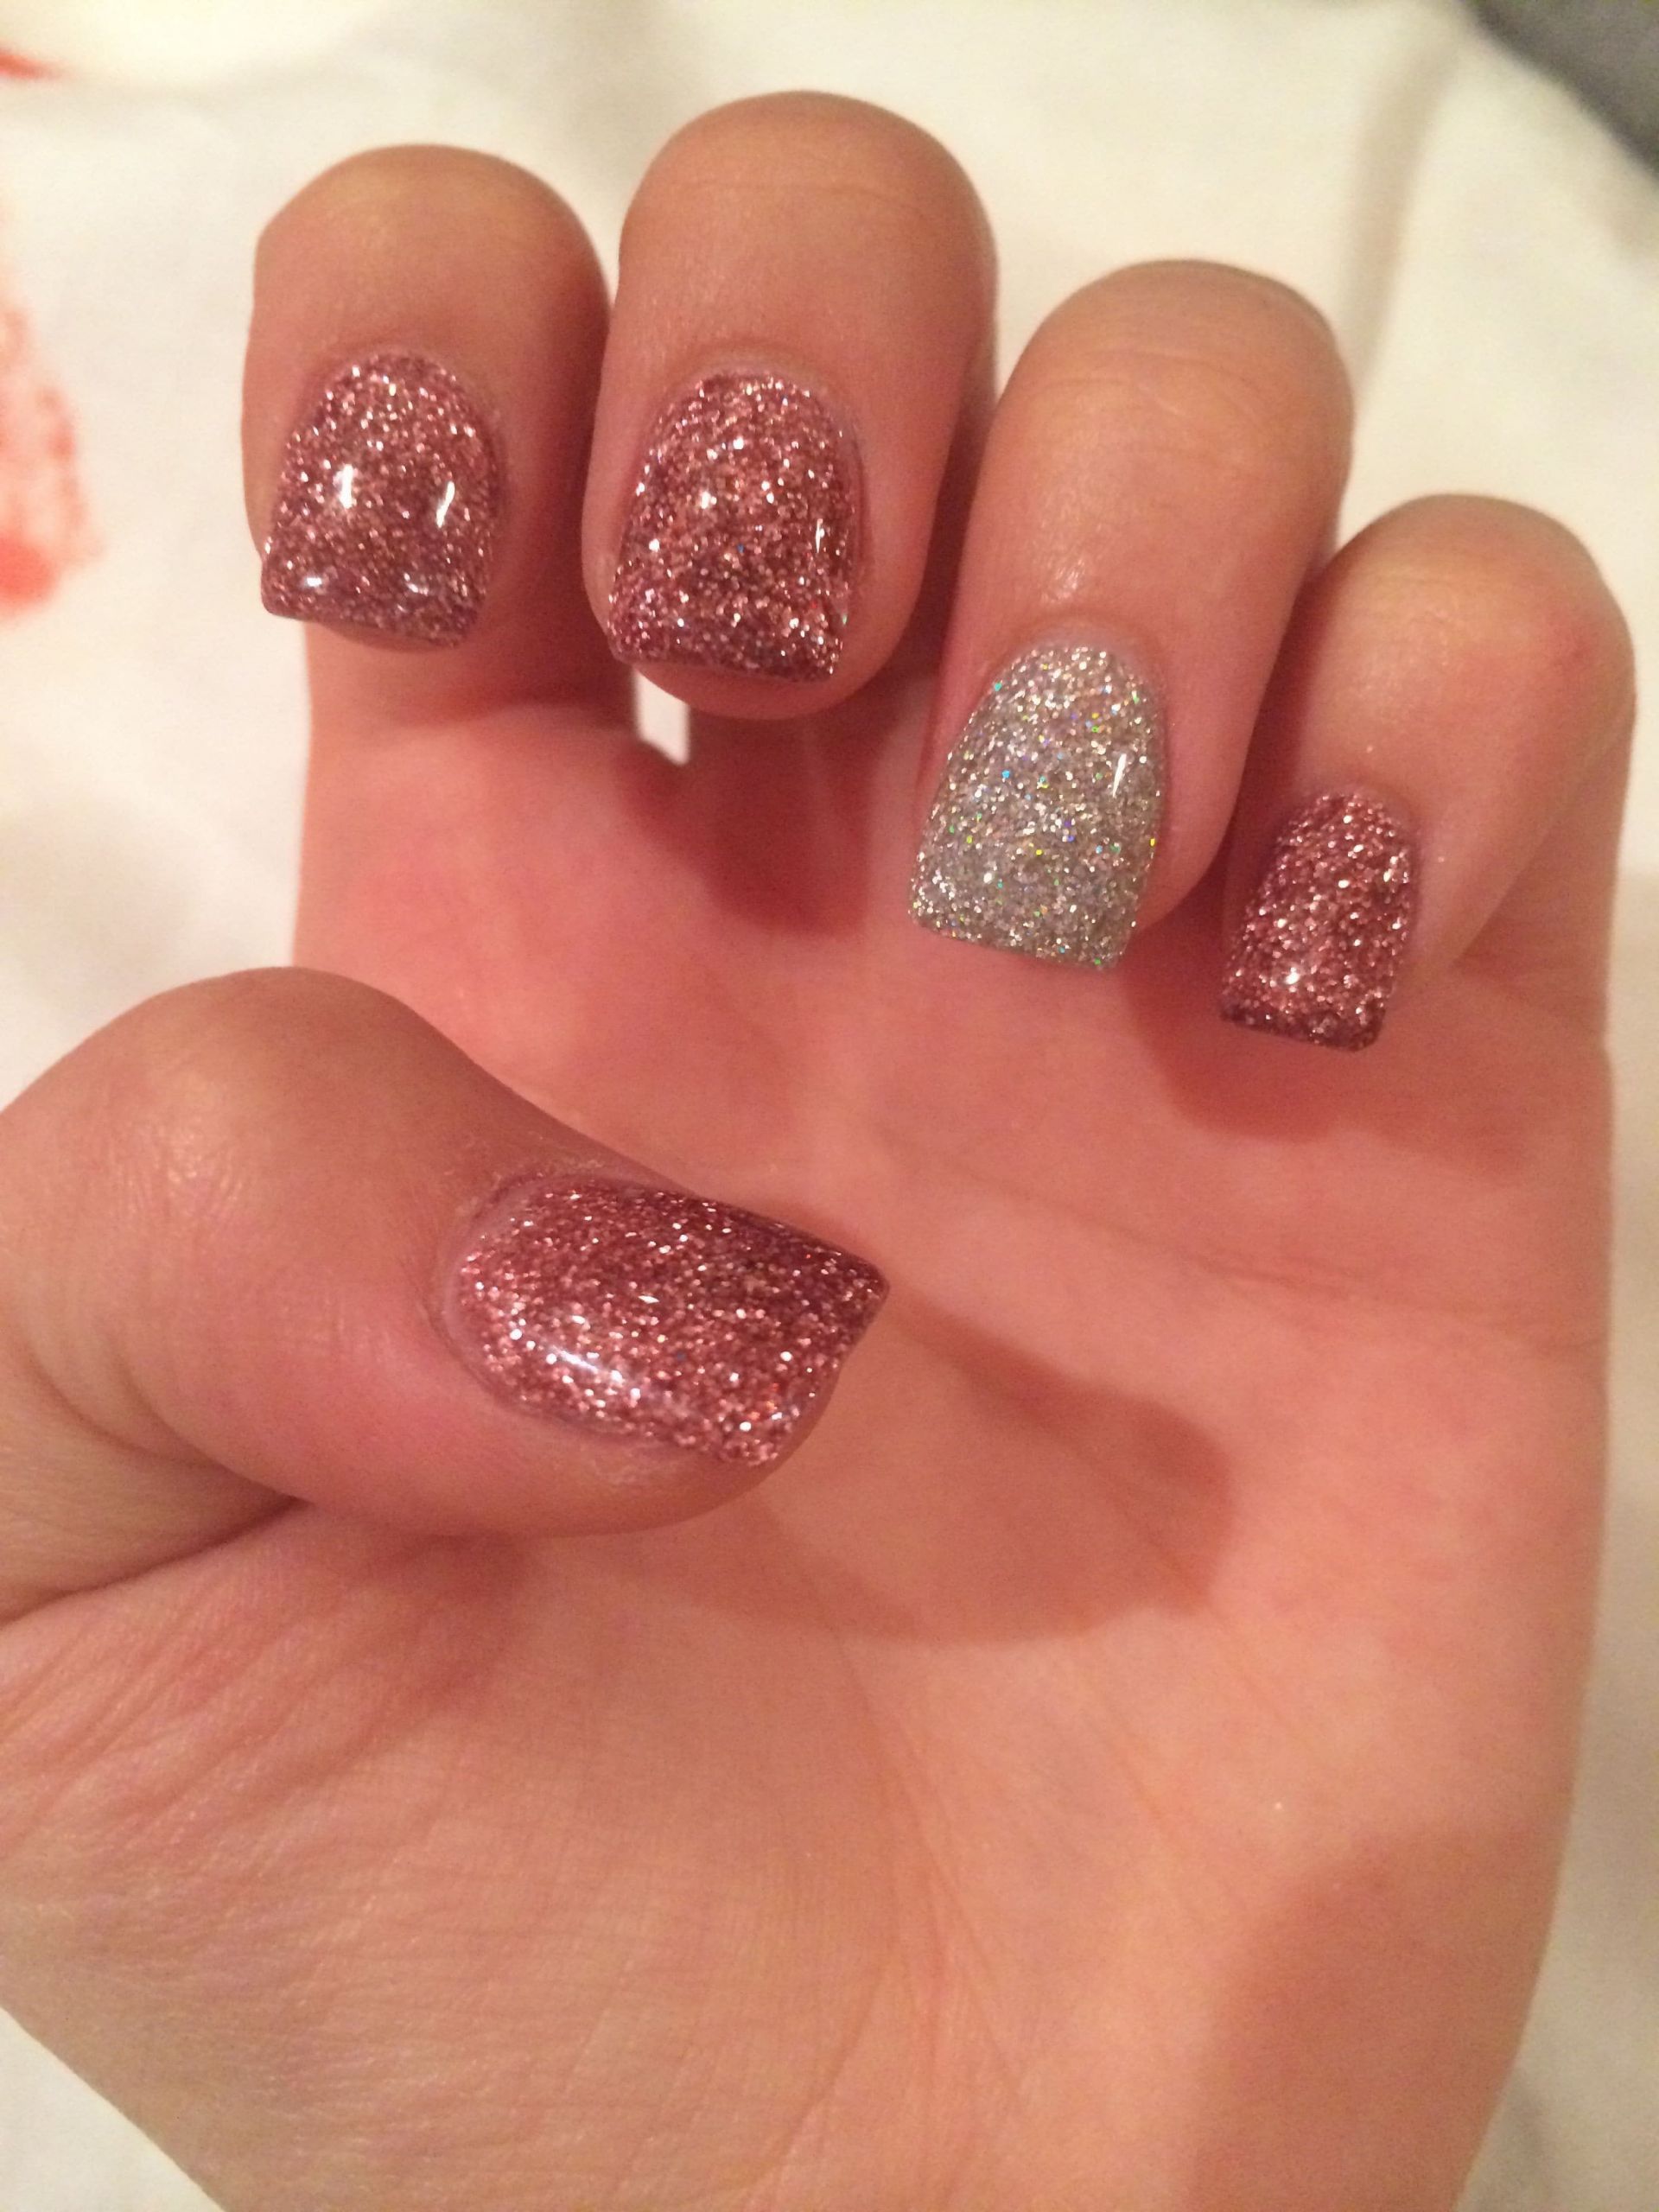 Glitter Nail Designs For Short Nails
 12 Pretty Short Acrylic Nail Designs for Prom